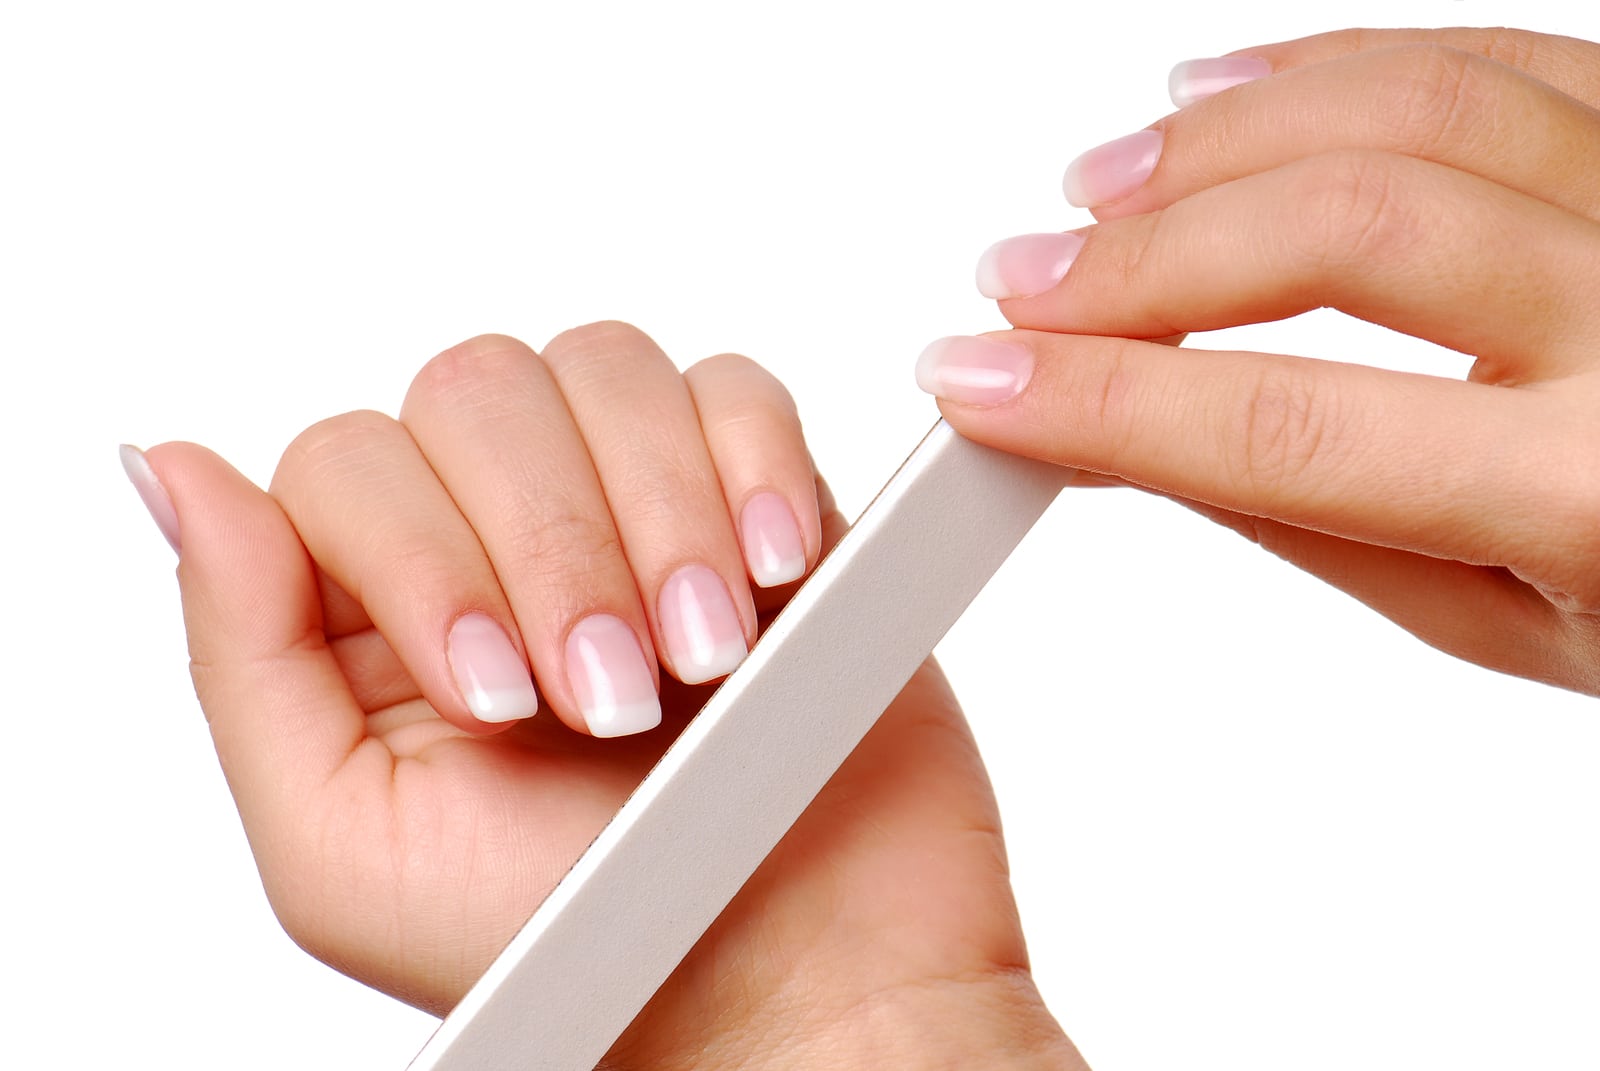 2. Nail File Designs for Girls with Long Nails - wide 11